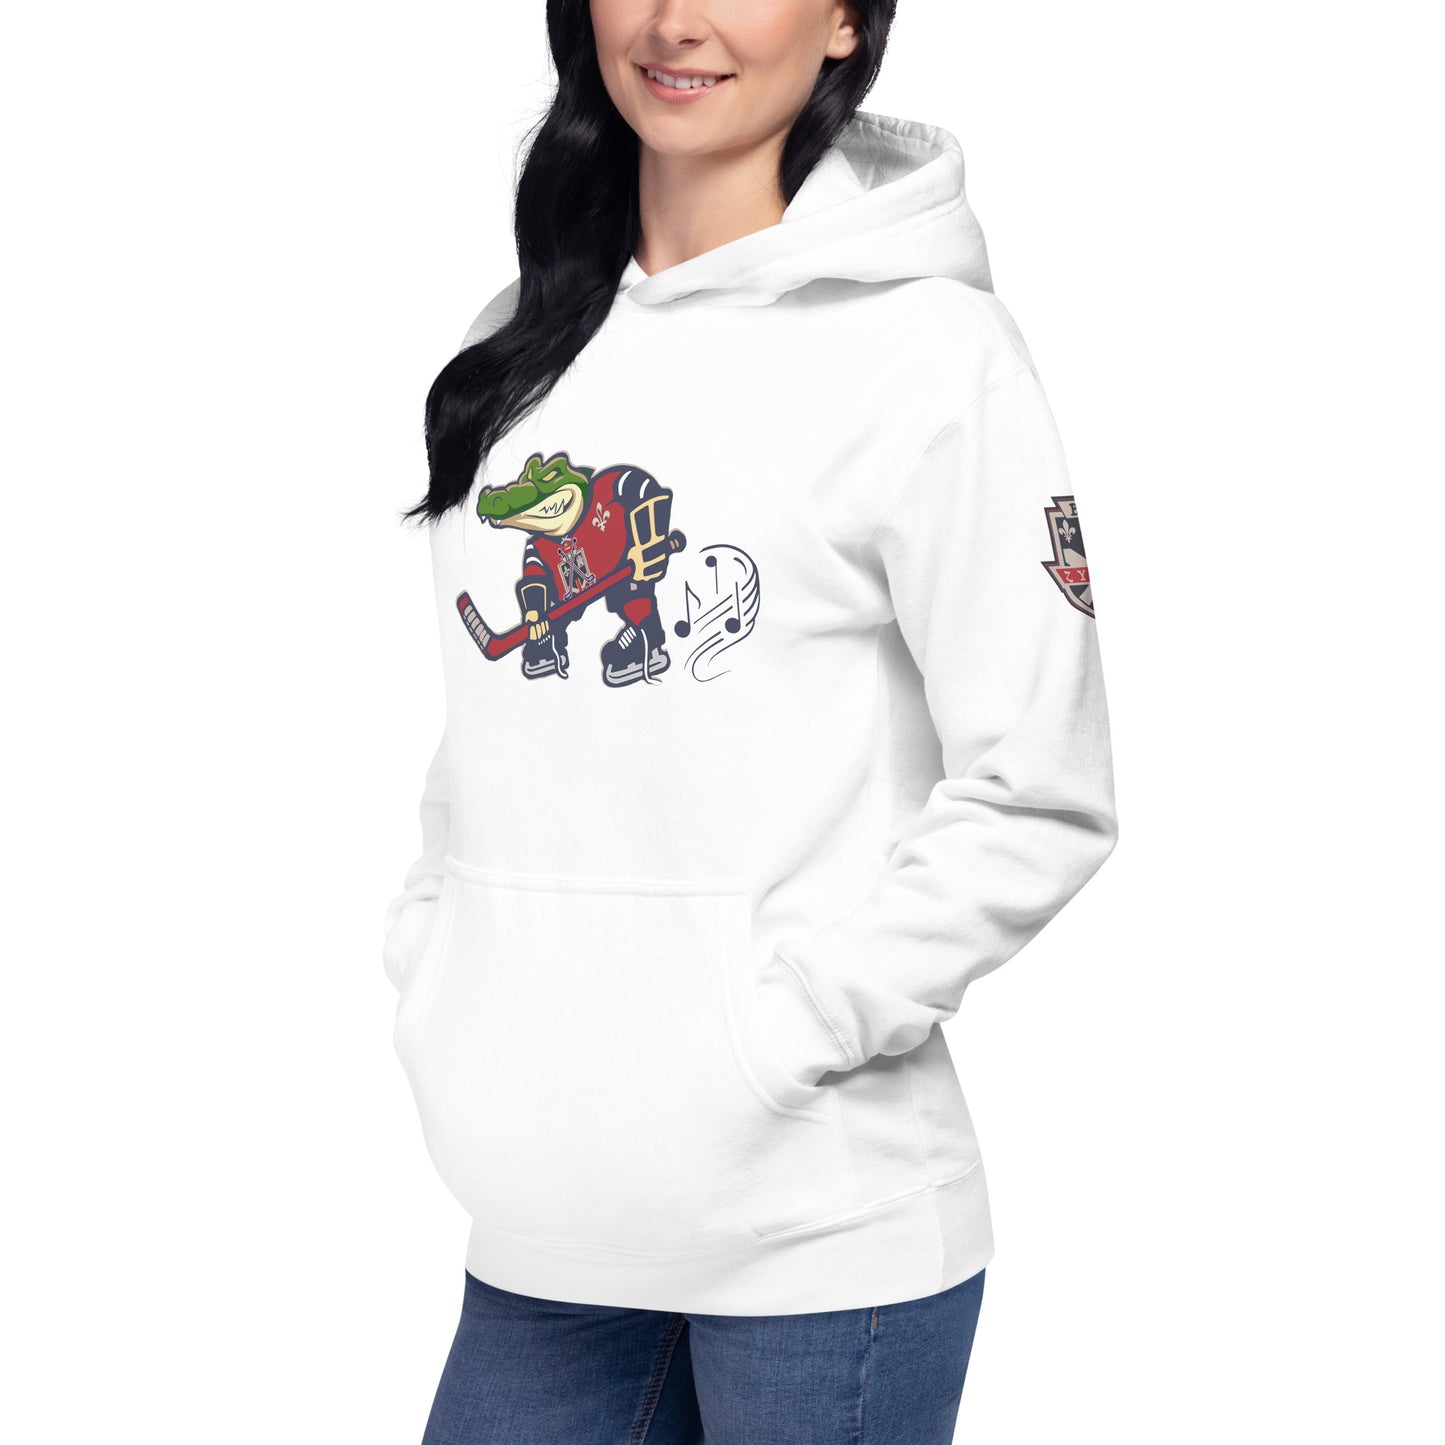 ZYDECO - AL MASCOT ONLY AND BADGE ON BACK - Unisex Hoodie